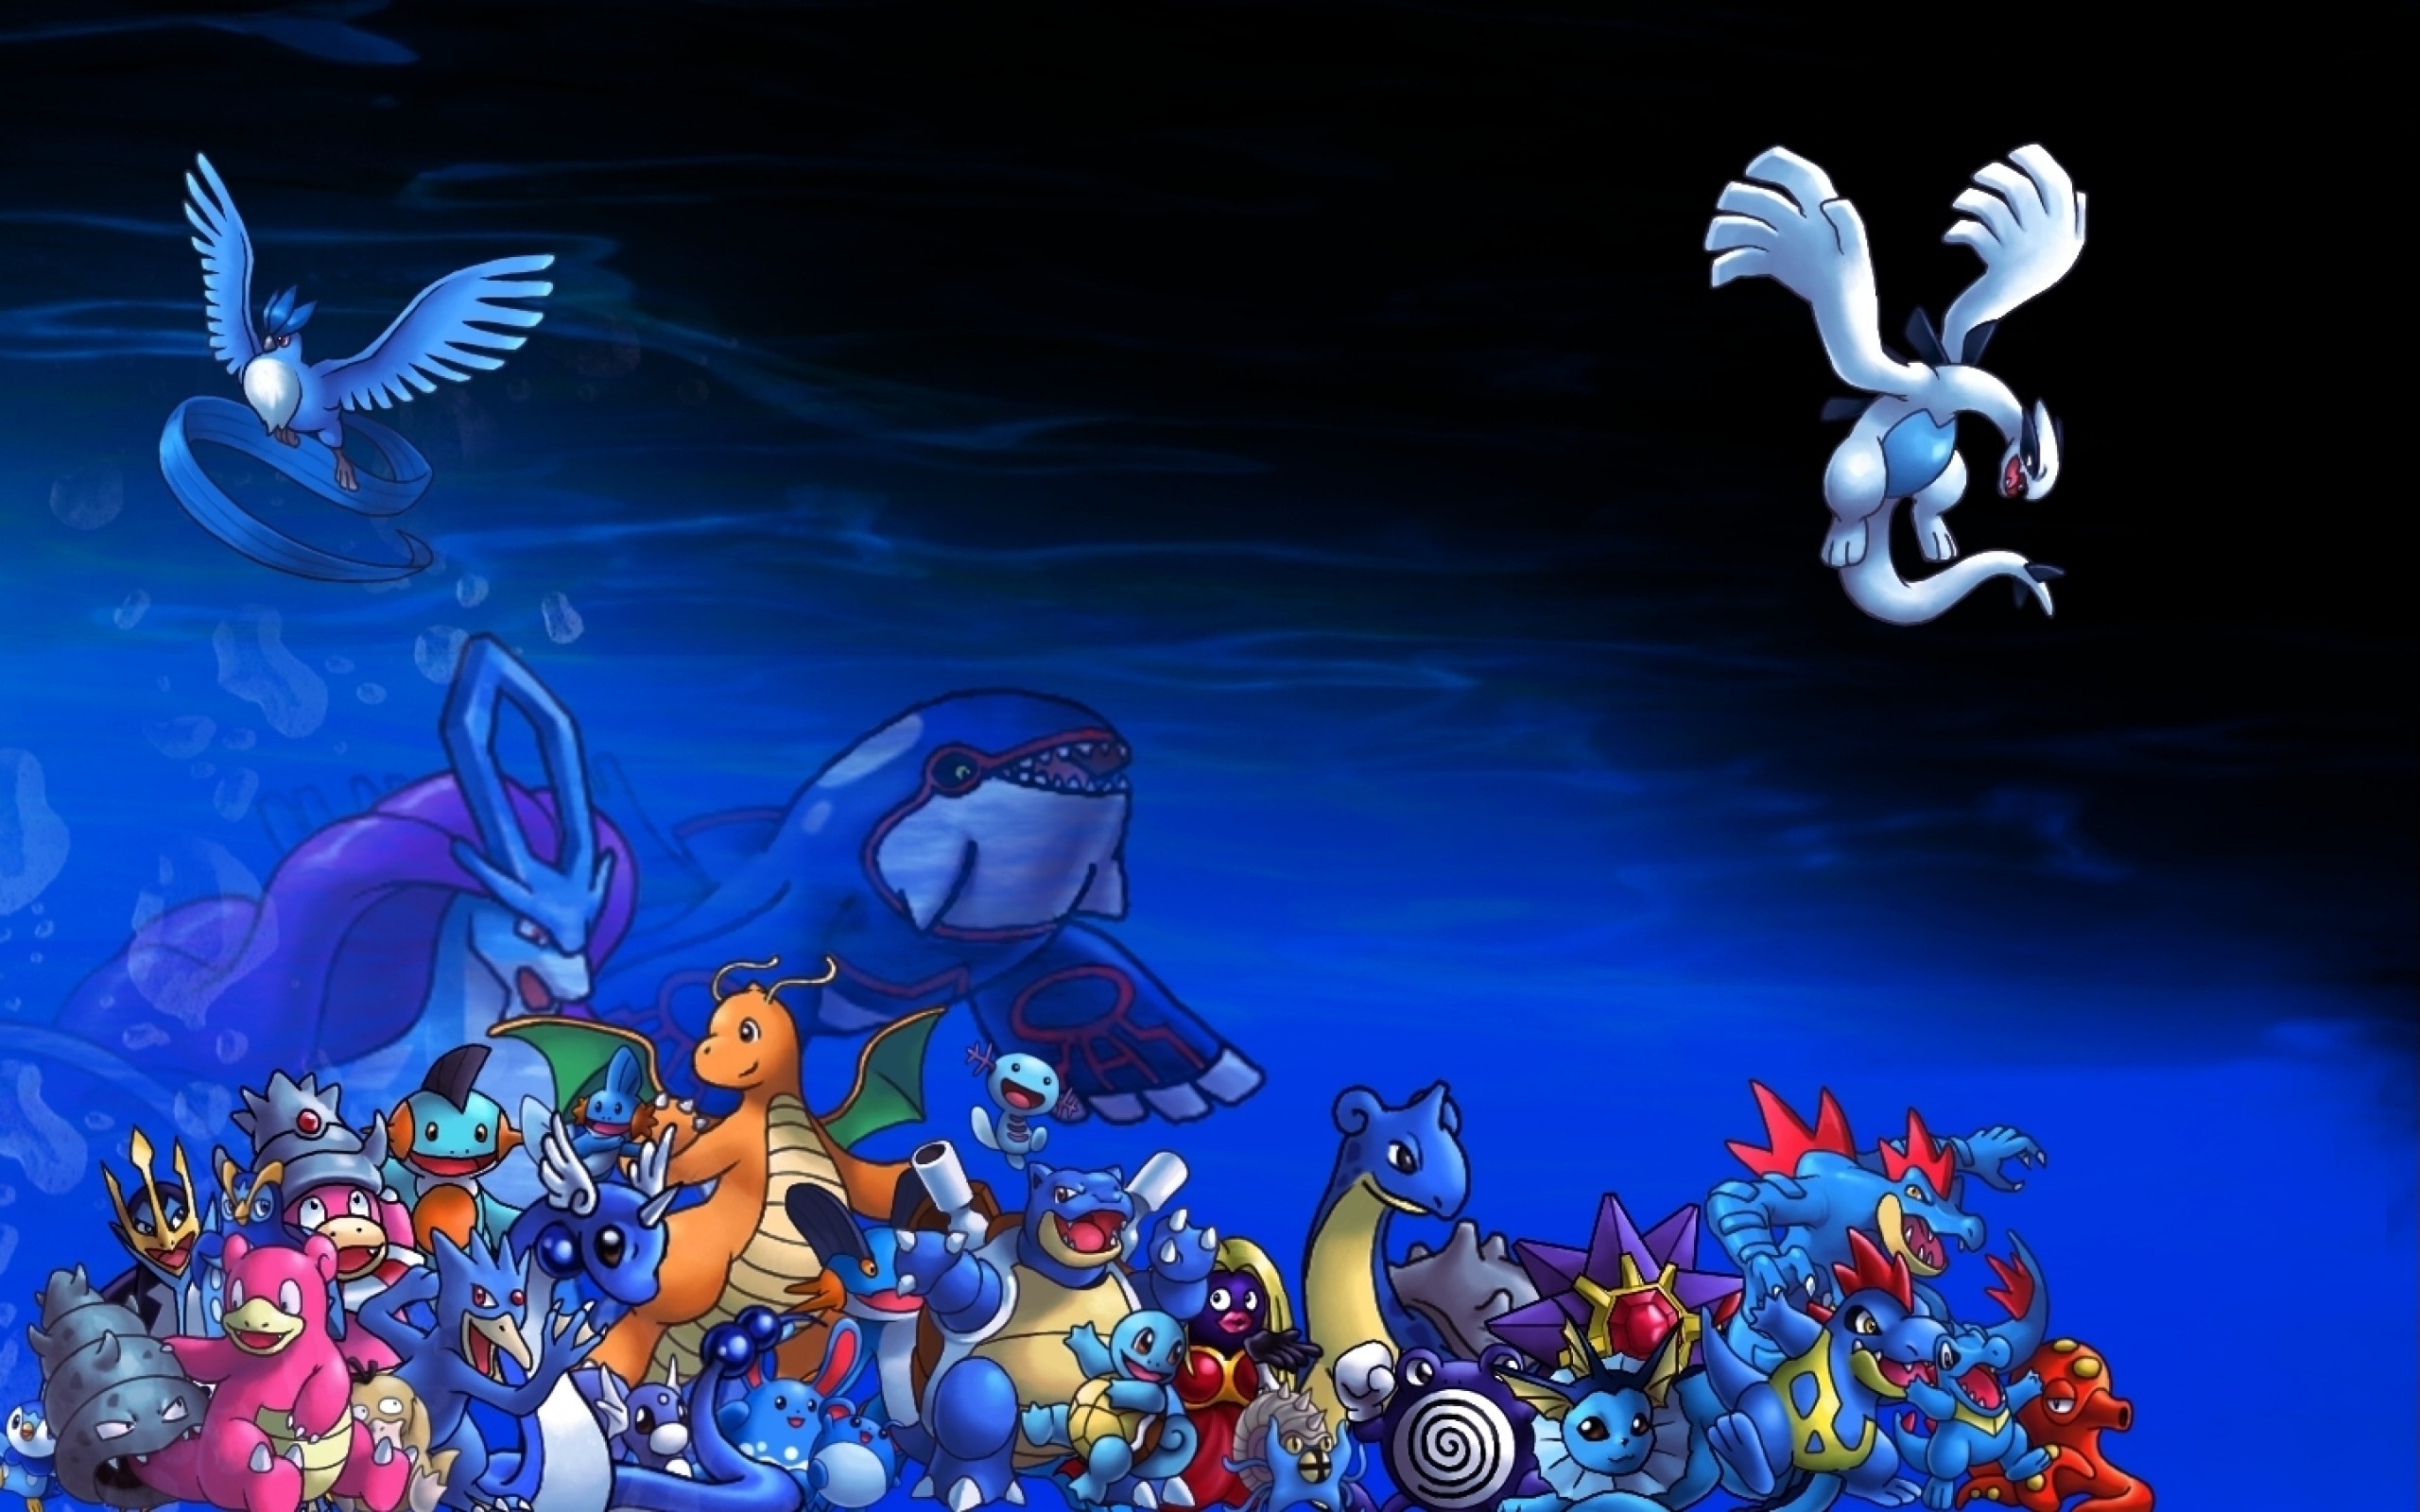 2560x1600 1920x1080 Primal Groudon And Kyogre Wallpaper, View: 230504062 Primal  Groudon And Kyogre Wallpaper, M.F.